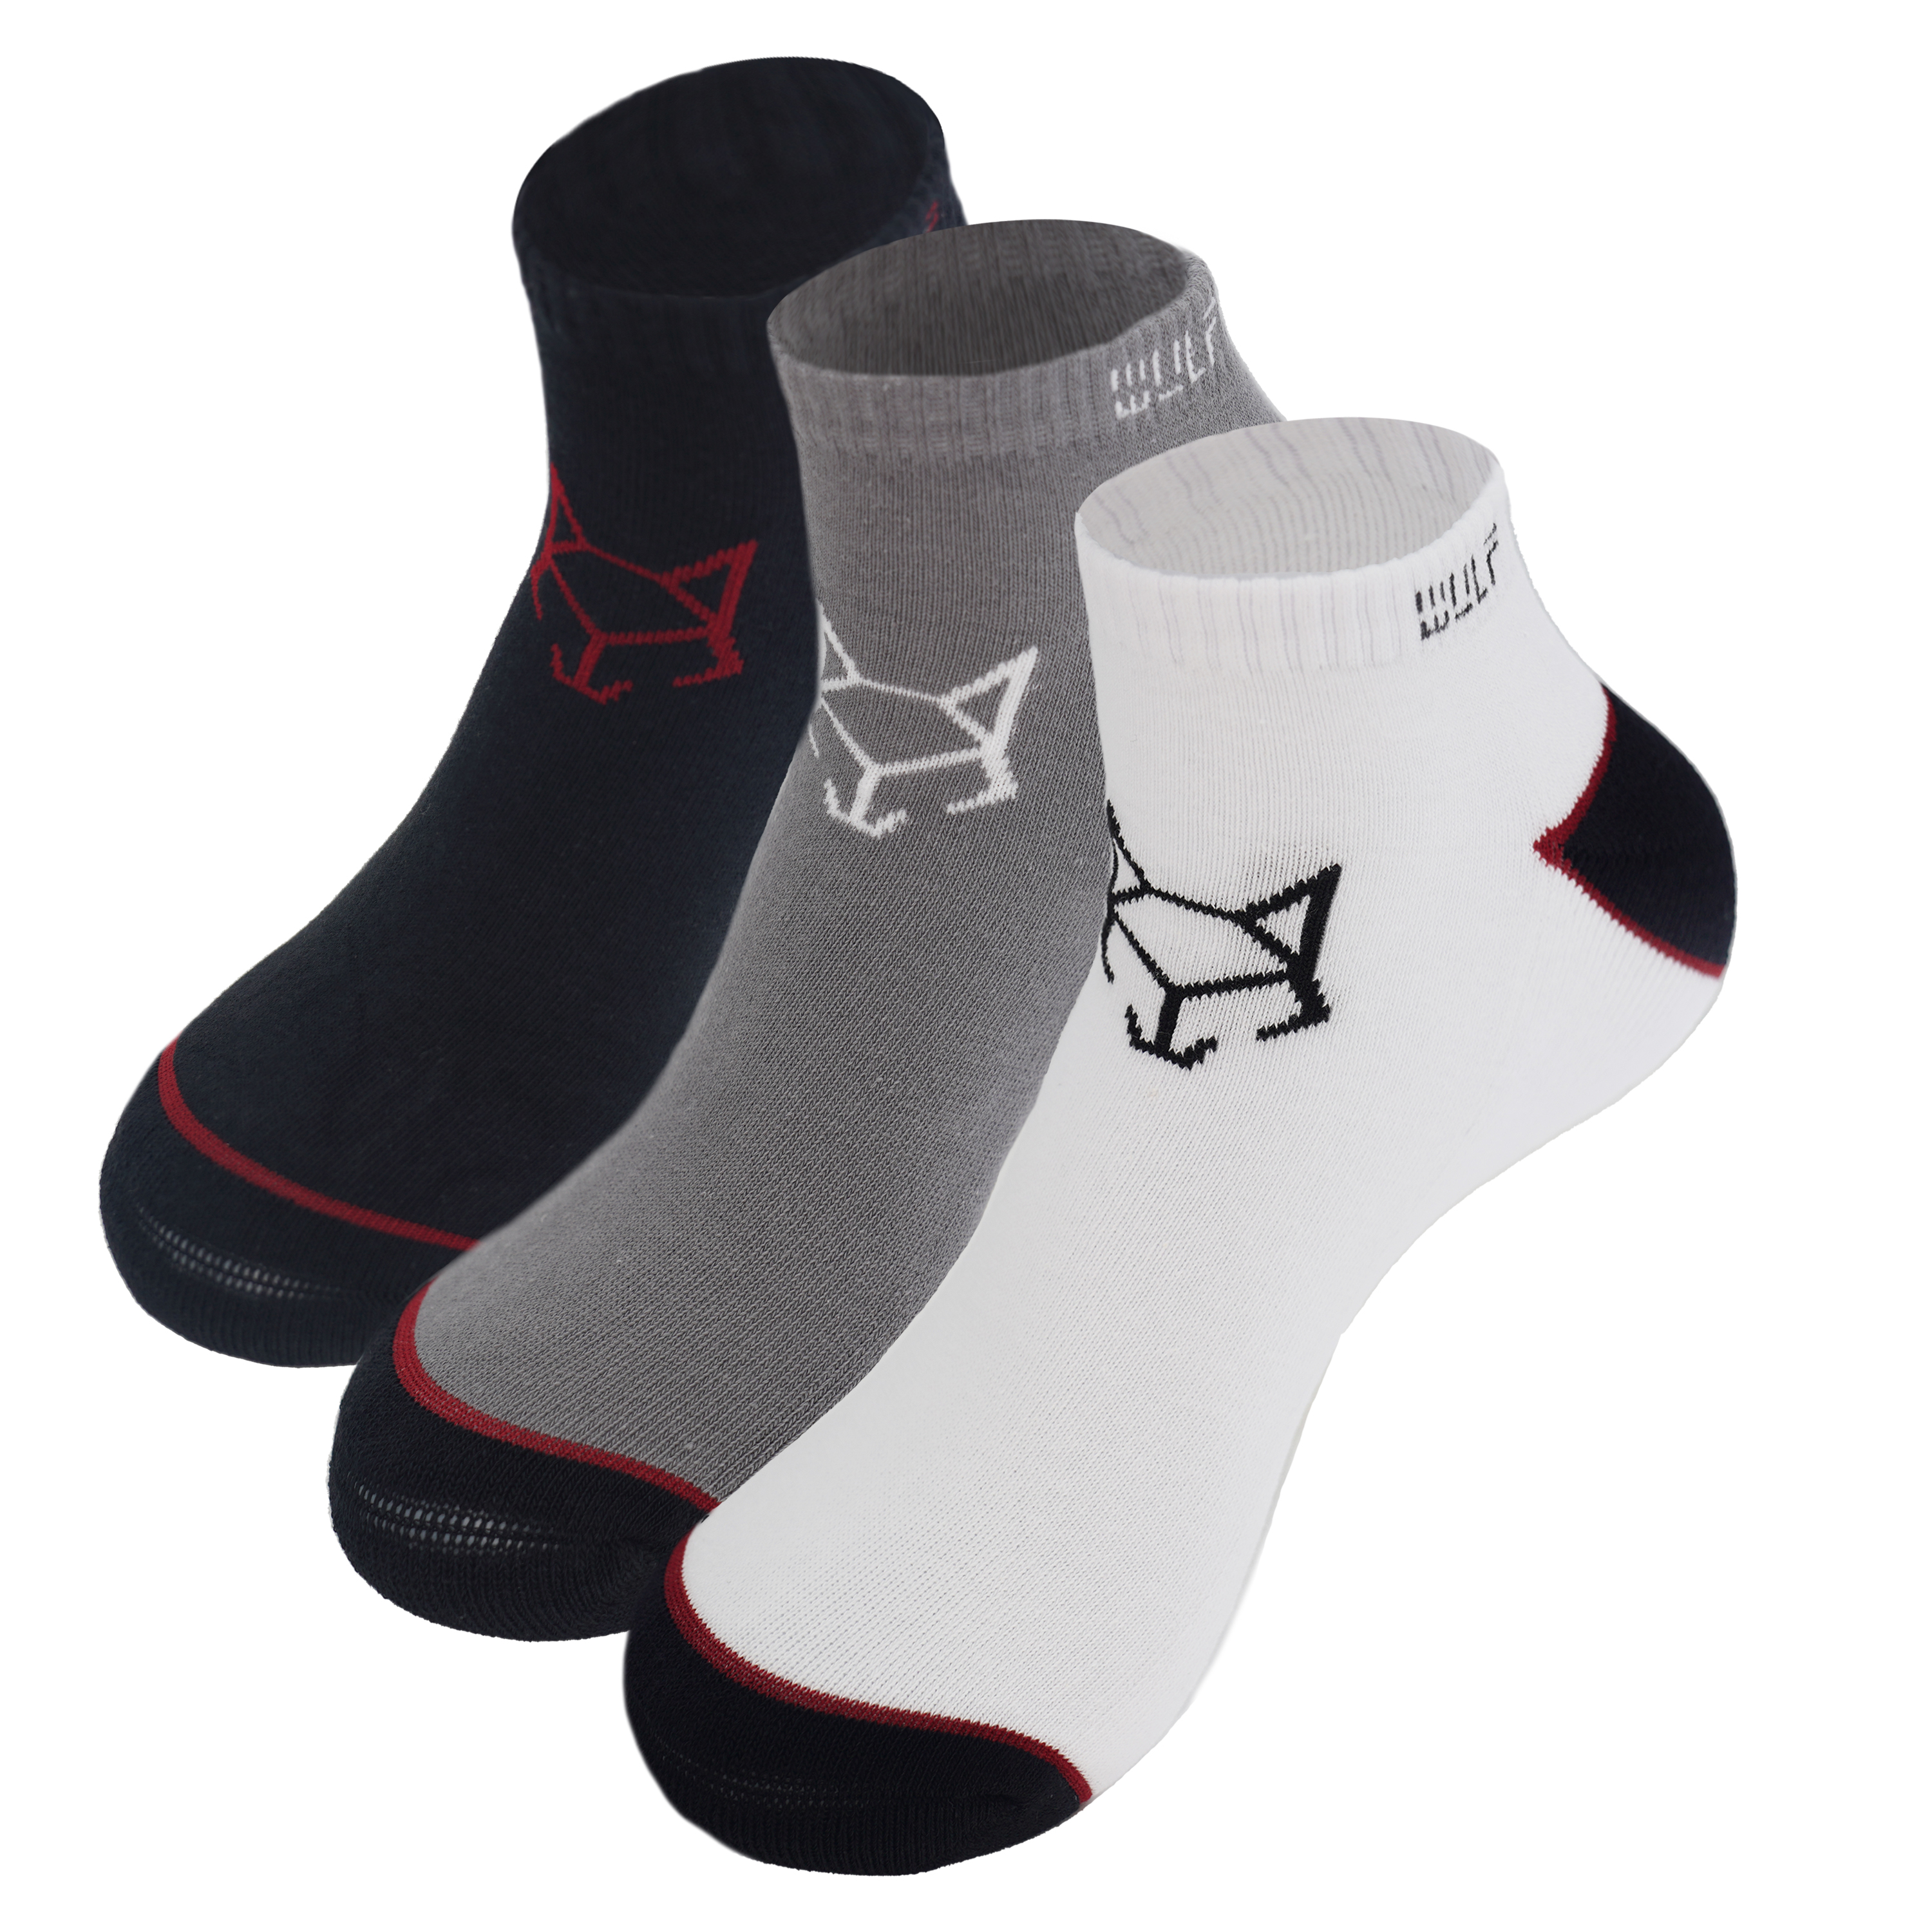 WULF Thick Cushion Ankle Socks, the epitome of high-end athletic wear designed to elevate your performance and comfort. Crafted with meticulous attention to detail, these breathable socks feature arch support, providing the perfect blend of cushioning and stability during athletic activities and running.